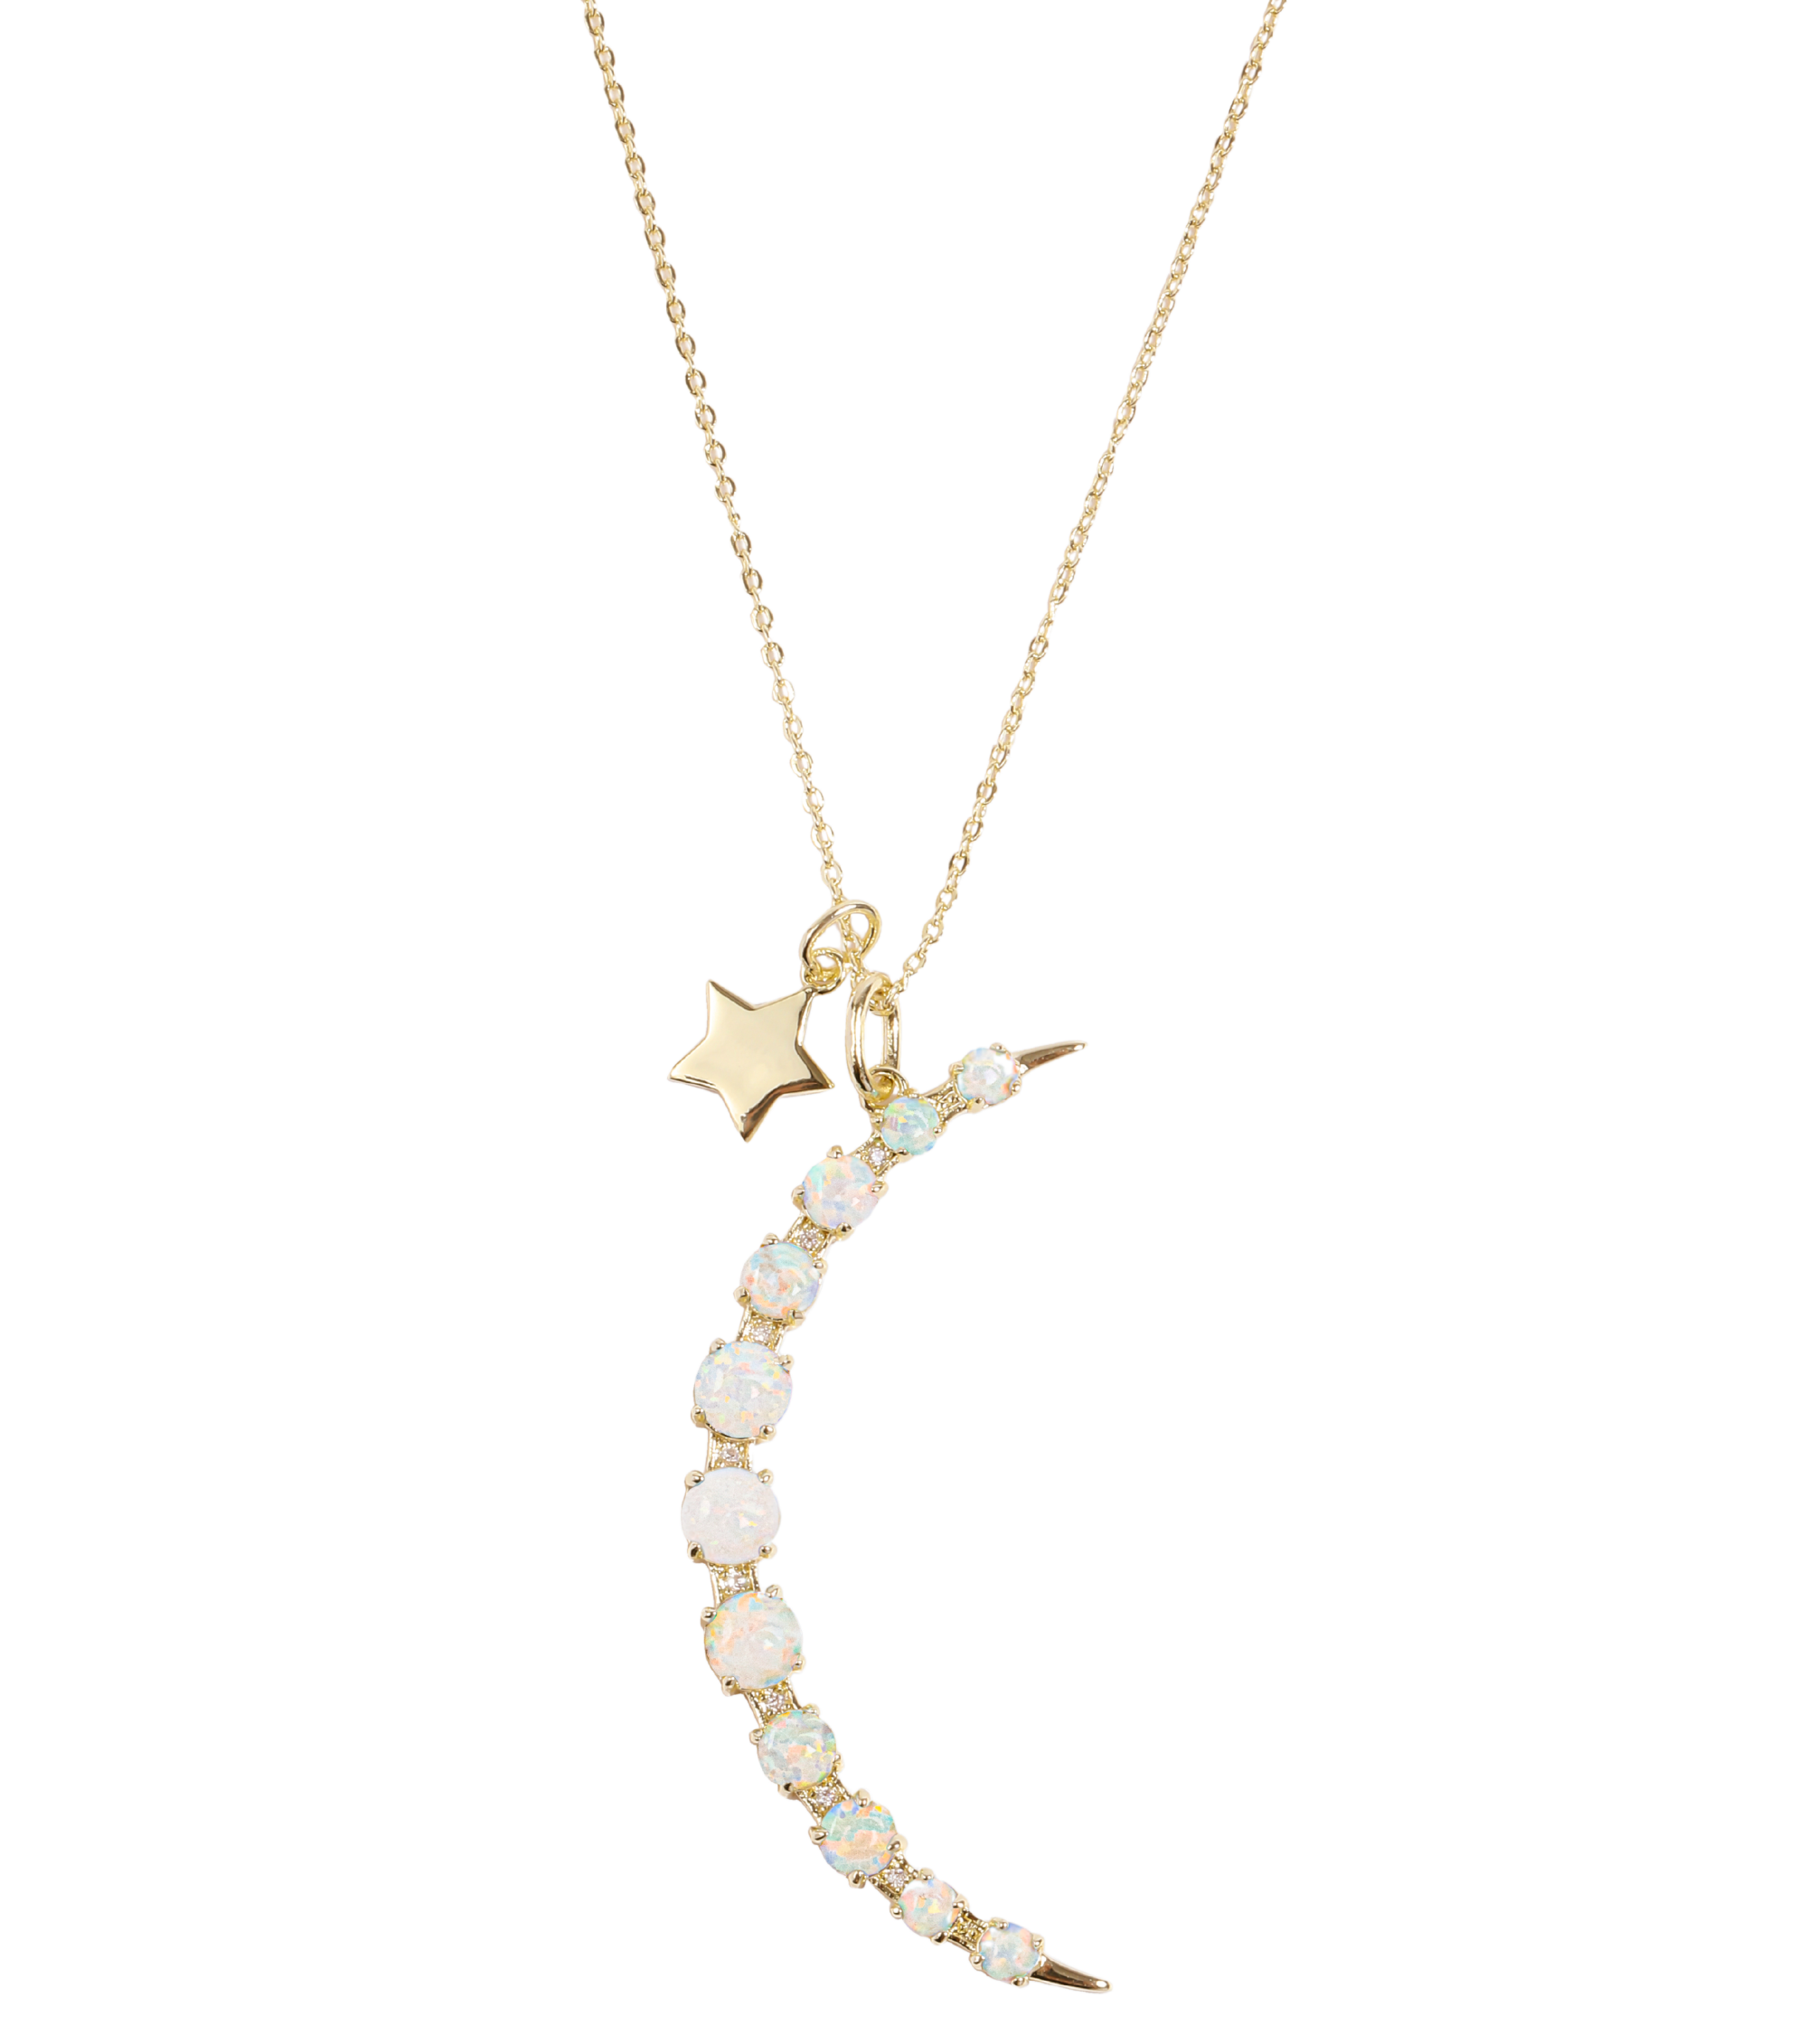 Melinda Maria's white opal necklace with a crescent moon and a small gold star